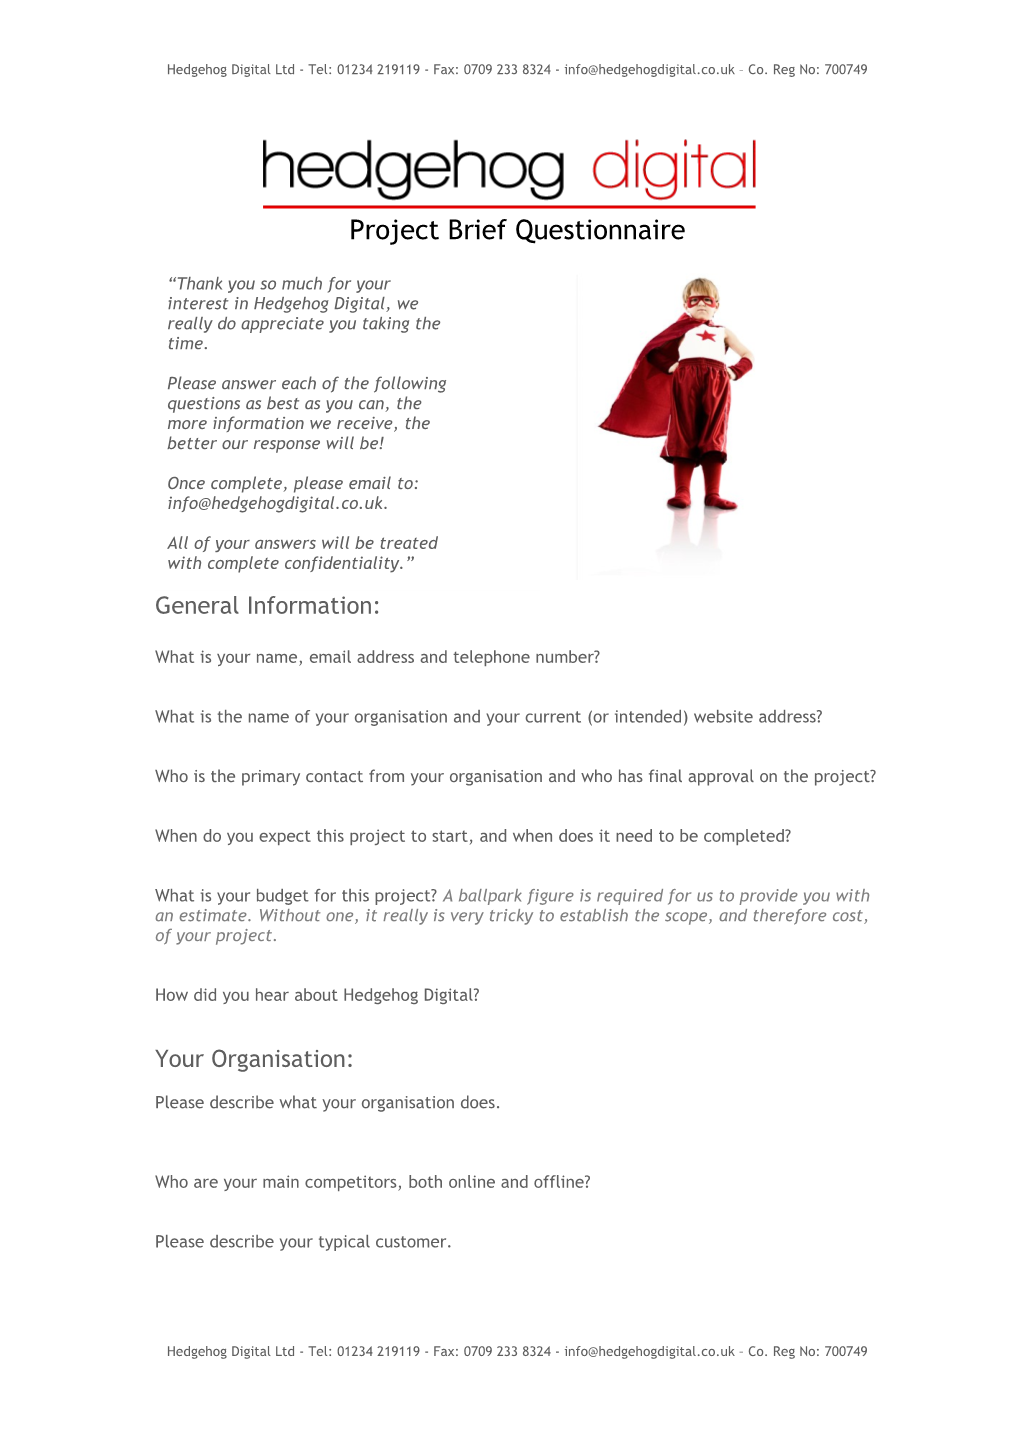 Project Brief Questionnaire